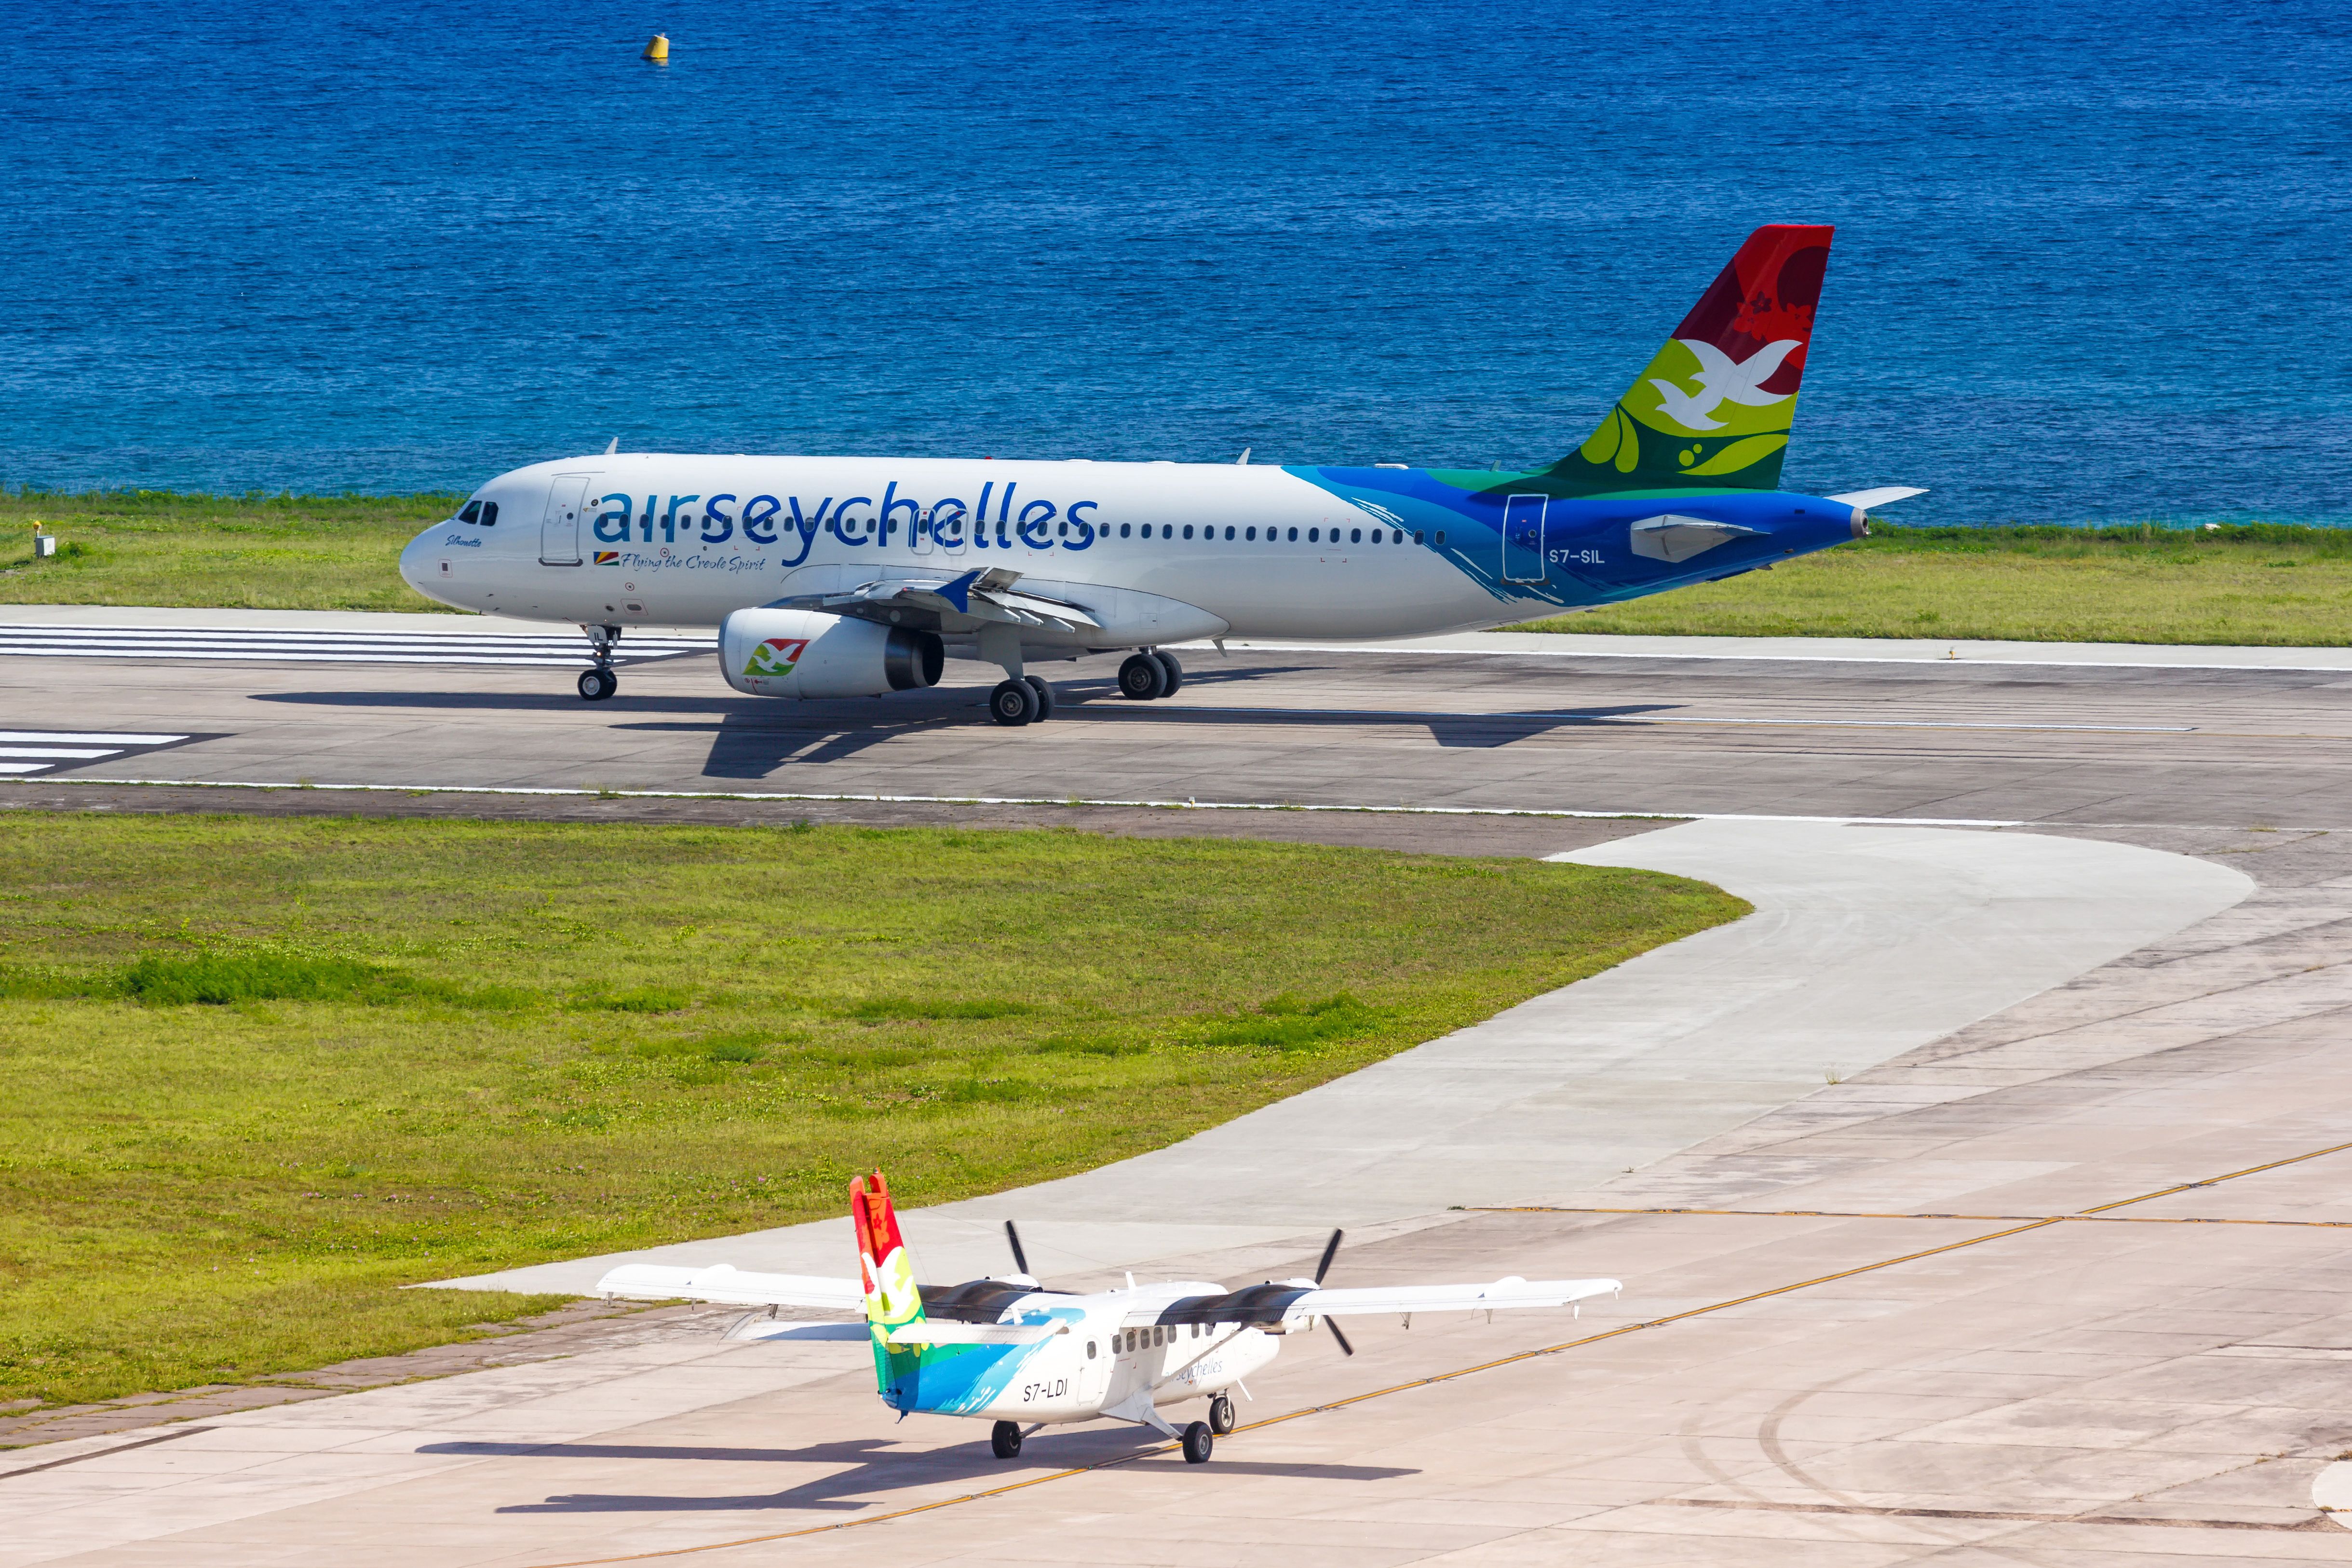 Air Seychelles A320 on the runway, as another Air Seychelles aircraft waits to enter the runway